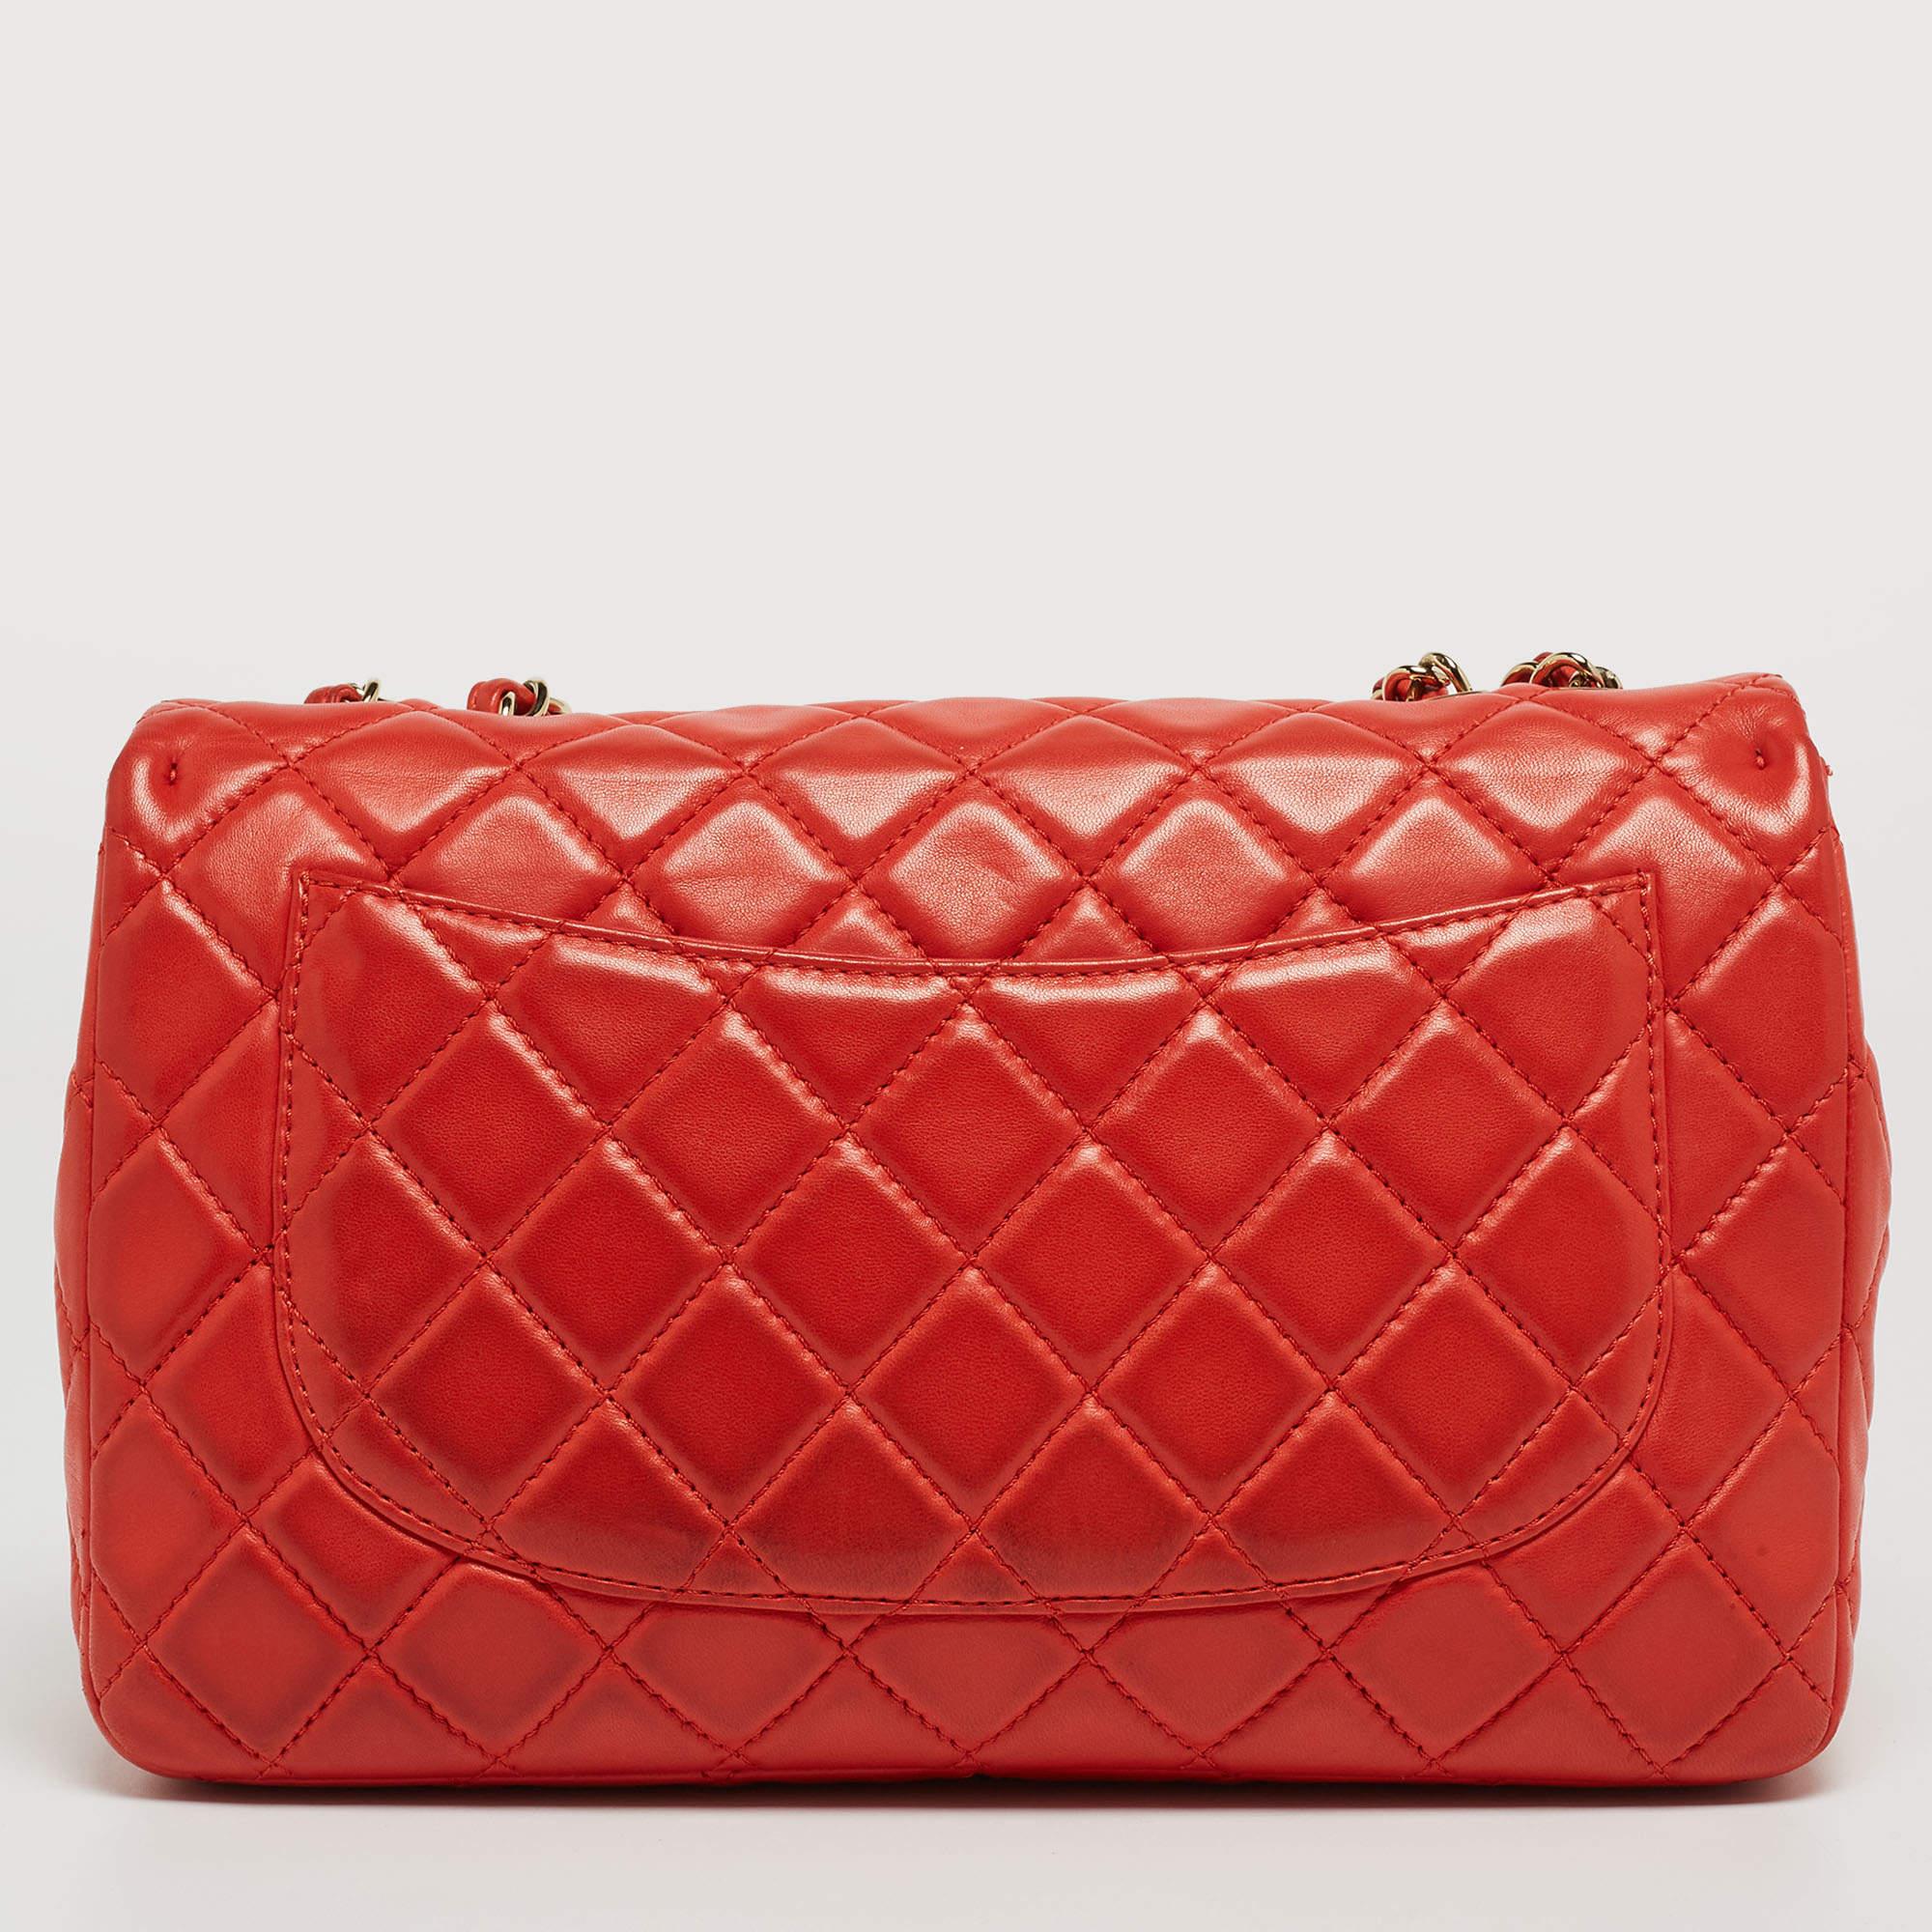 Chanel Red Quilted Lambskin Leather Jumbo Classic Single Flap Bag For Sale 8